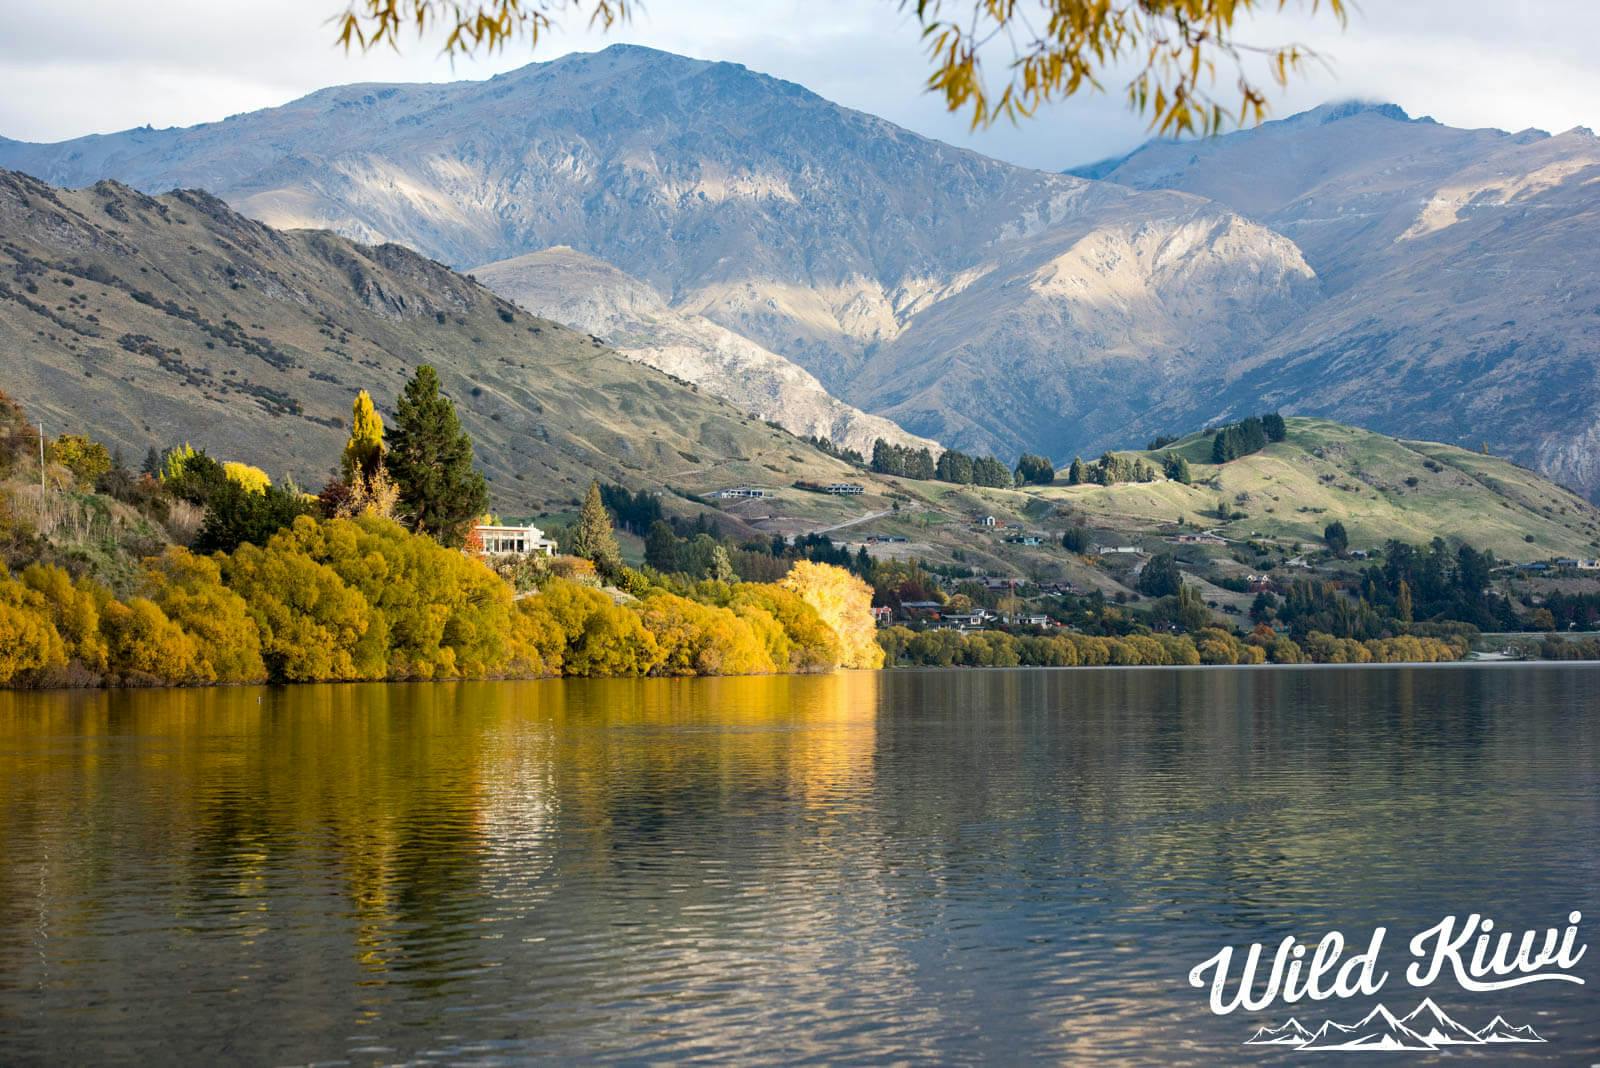 Tours of New Zealand - Check out the natural sights